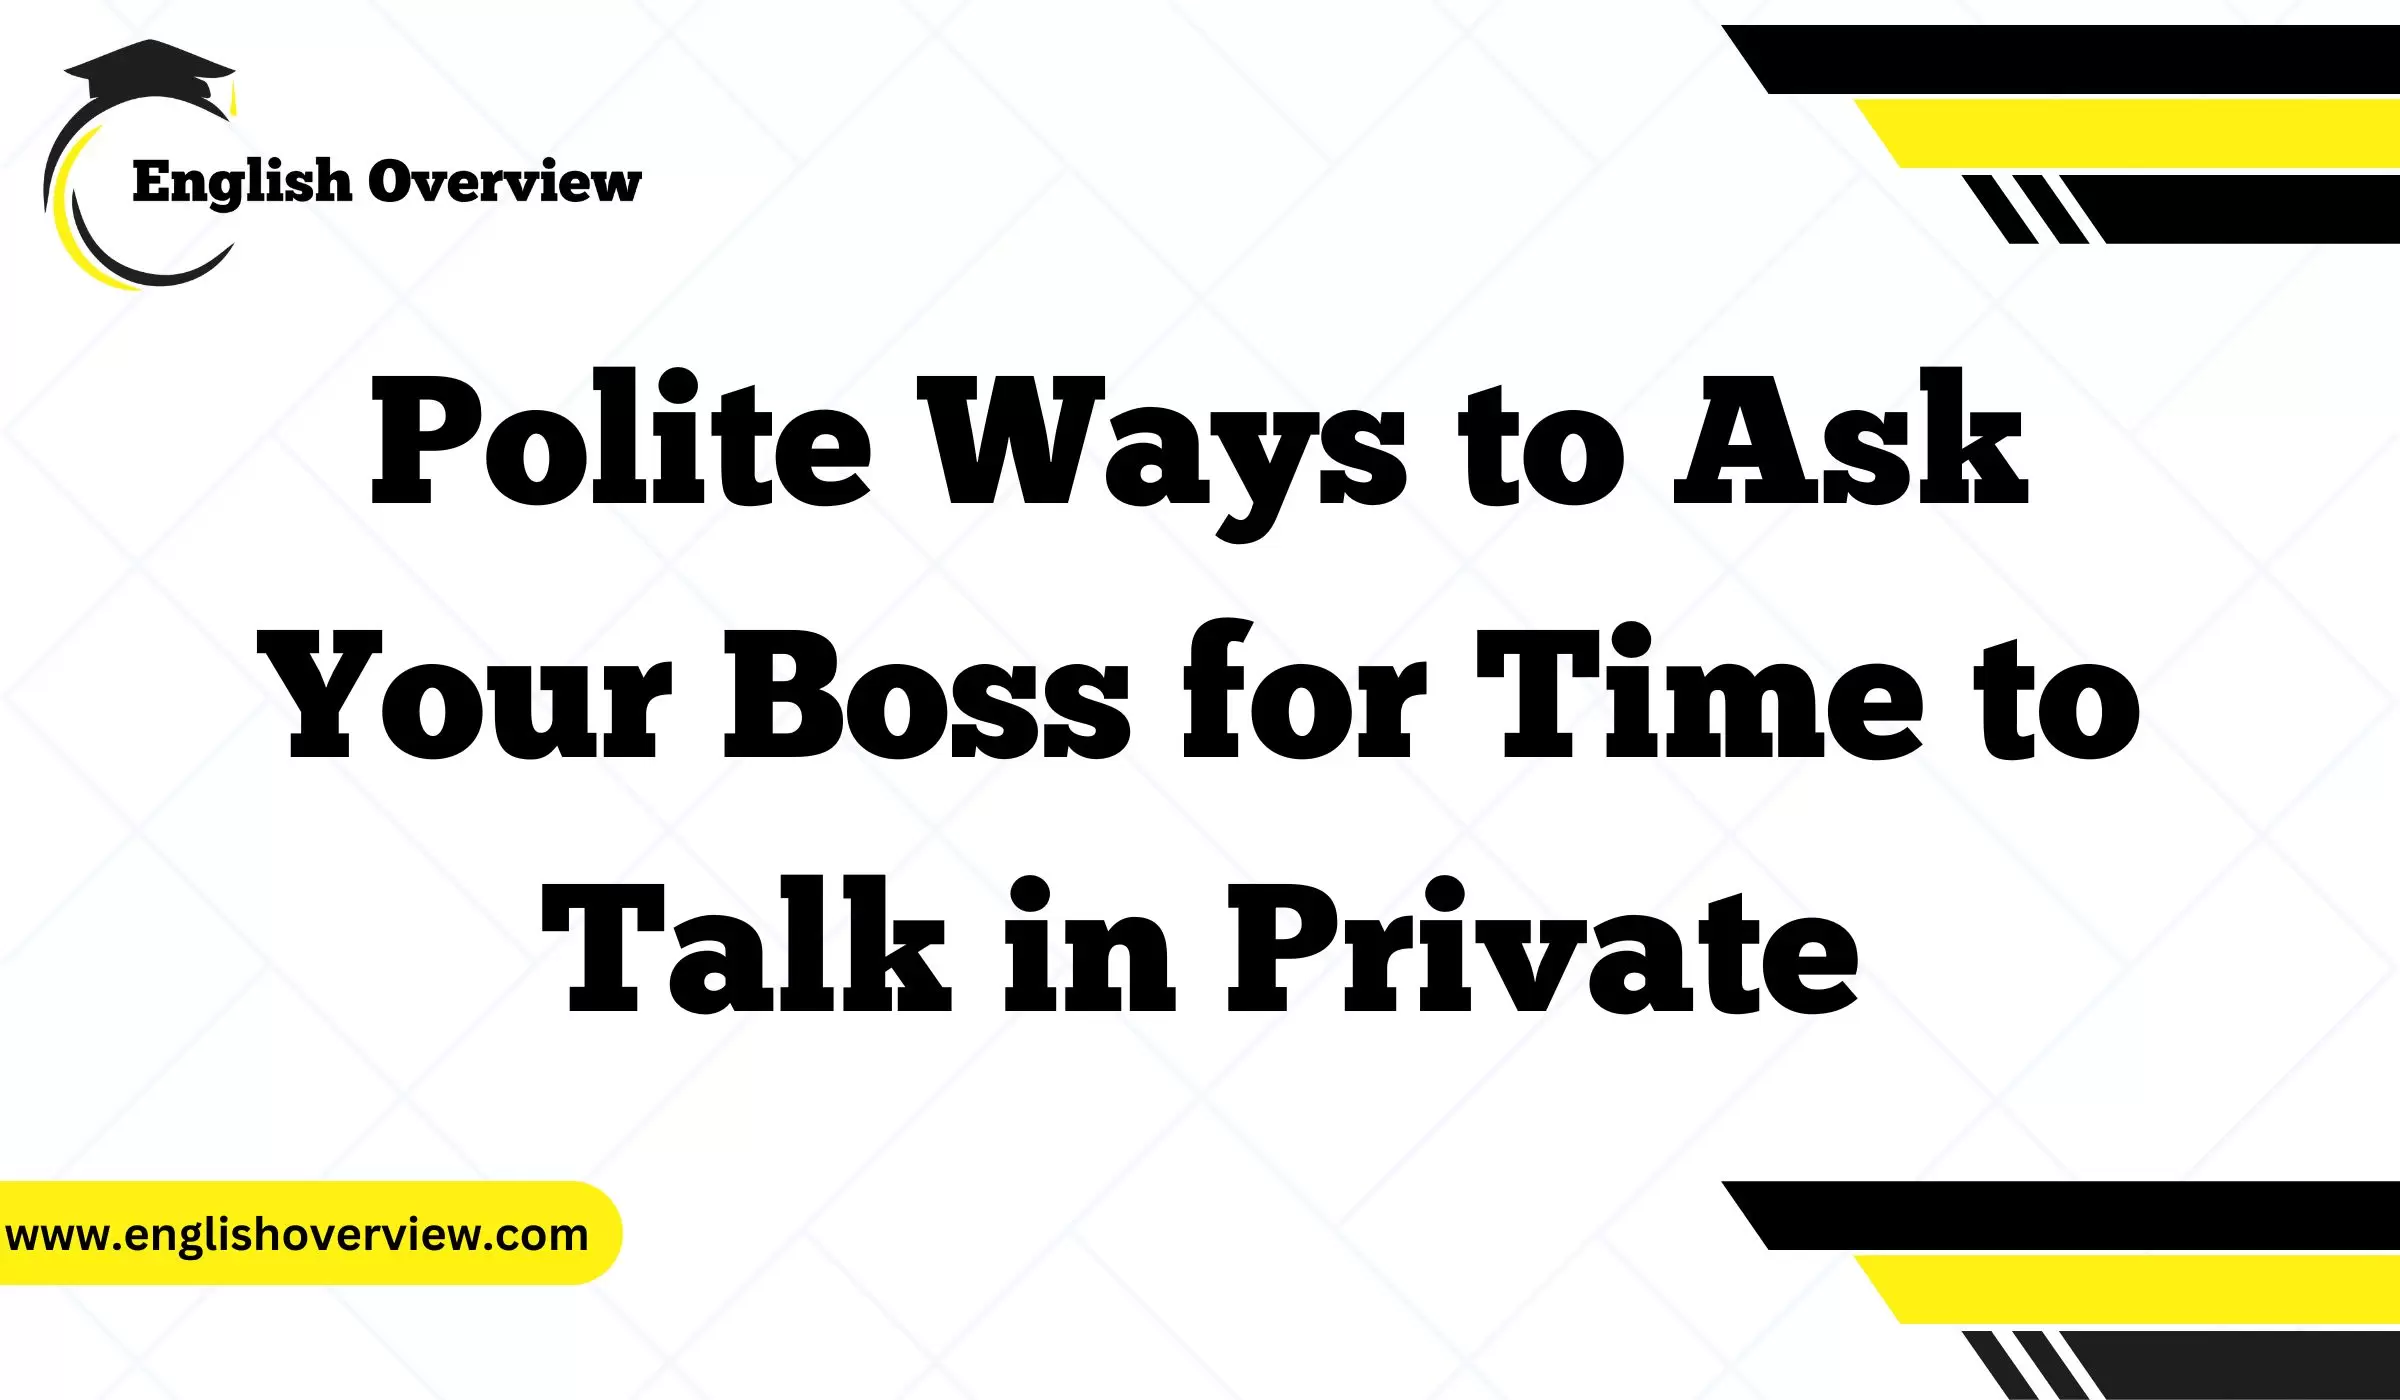 Polite Ways to Ask Your Boss for Time to Talk in Private